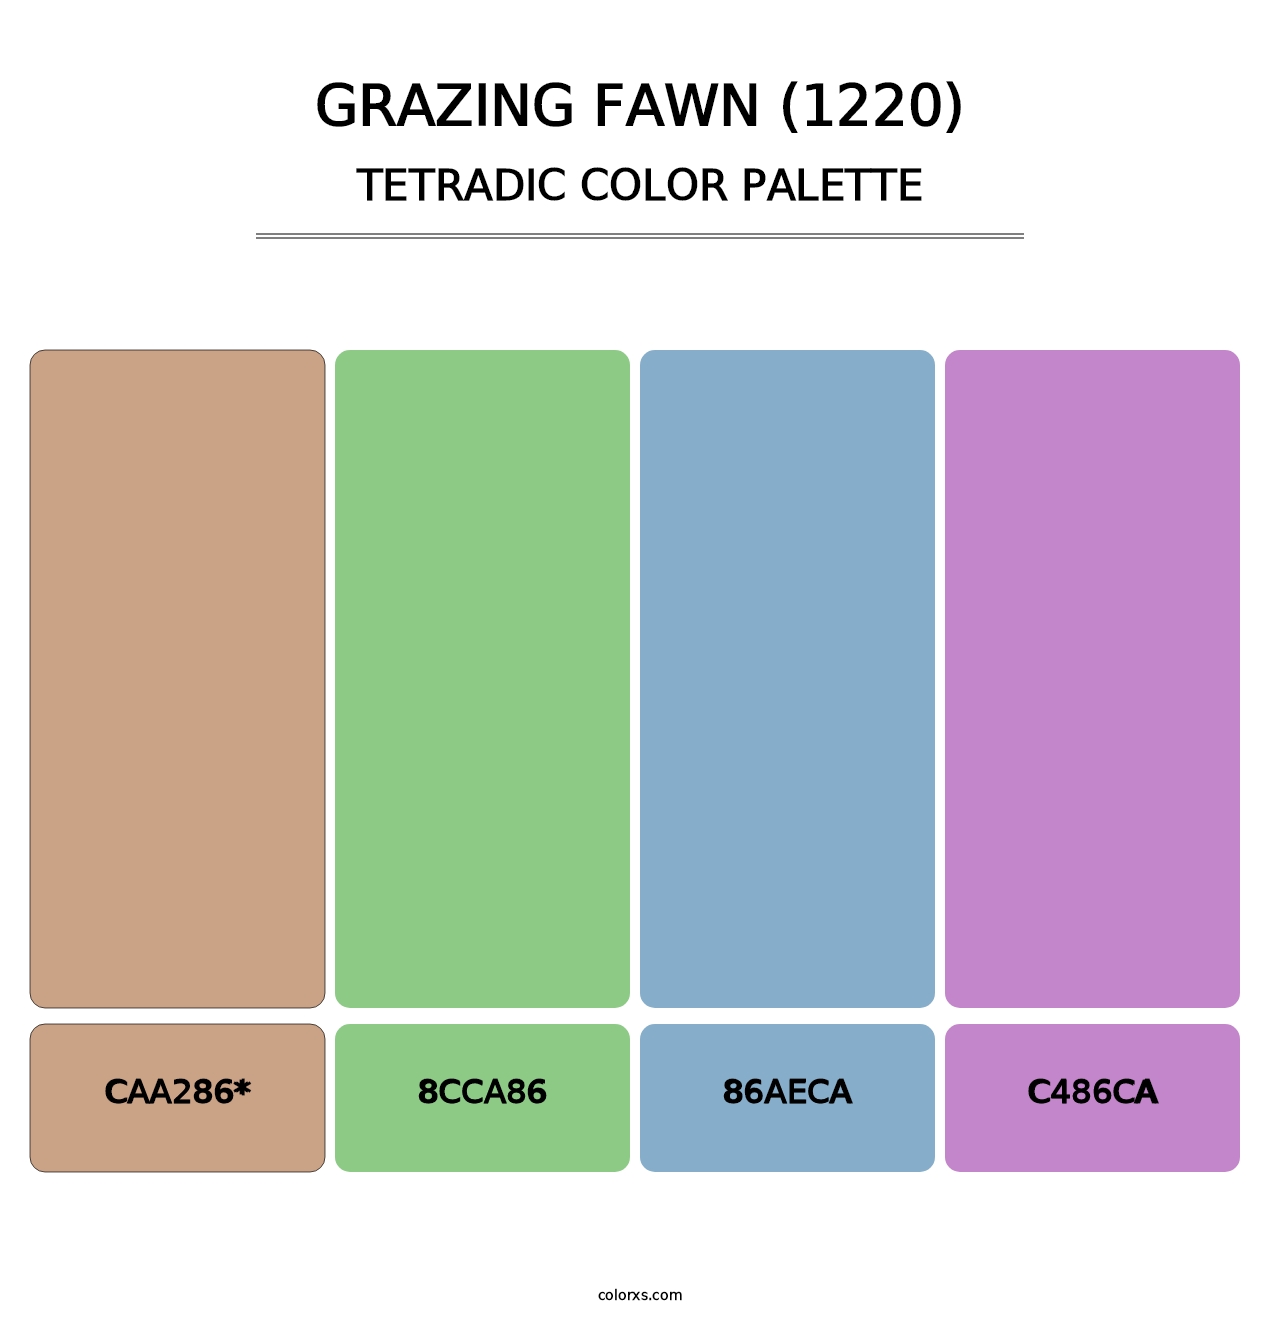 Grazing Fawn (1220) - Tetradic Color Palette